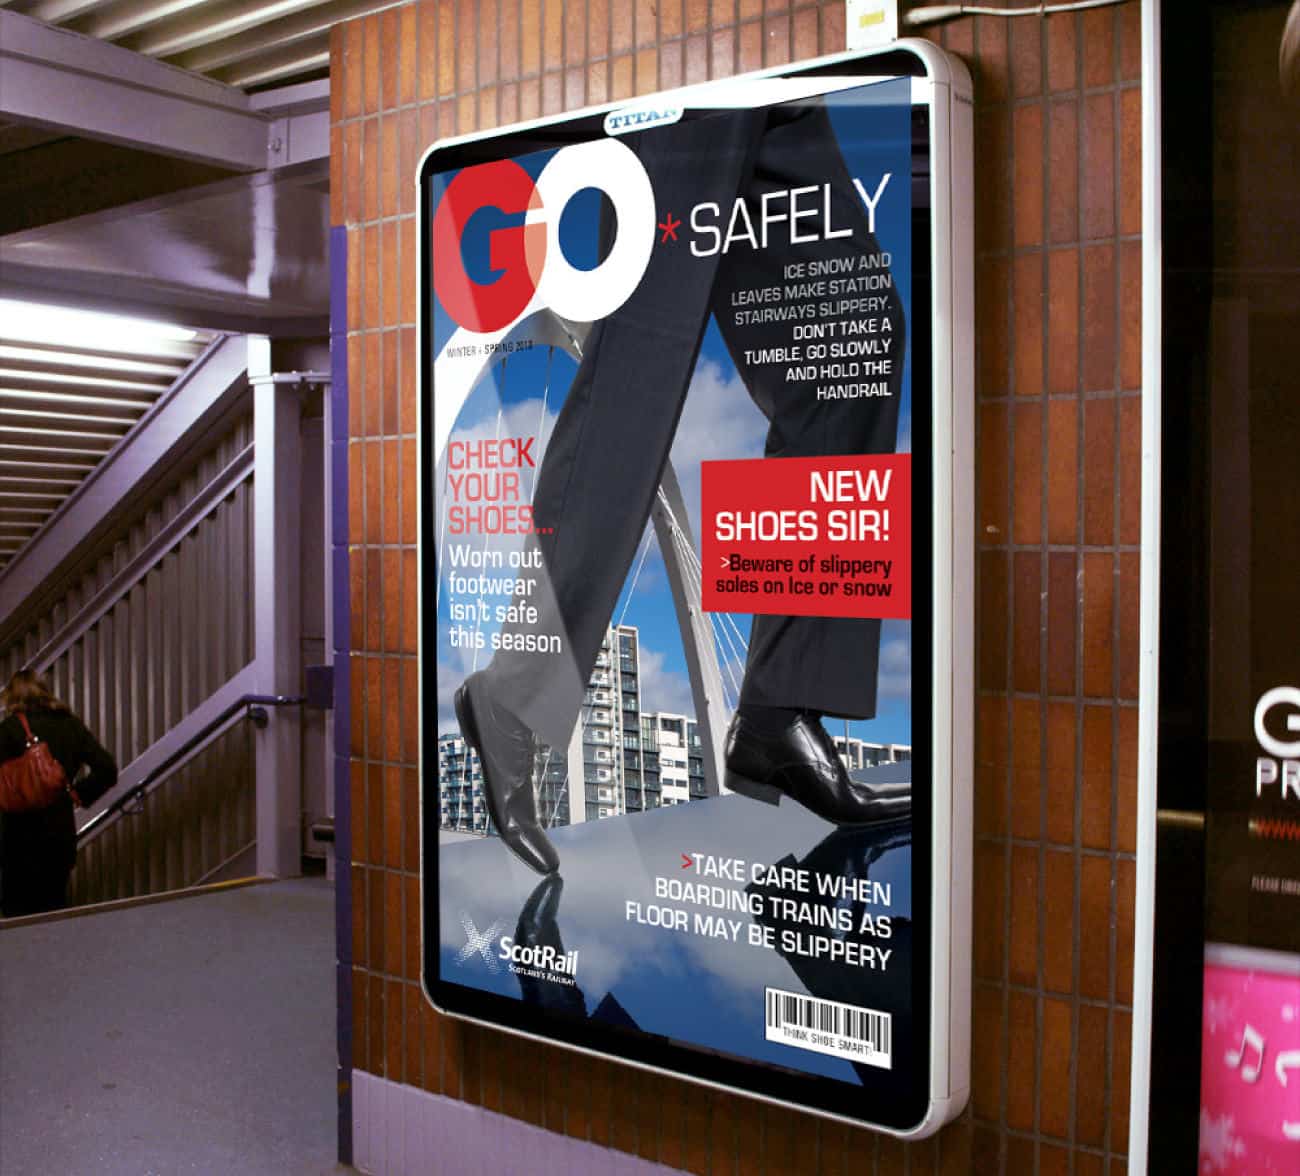 Scotrail go safetly campaign